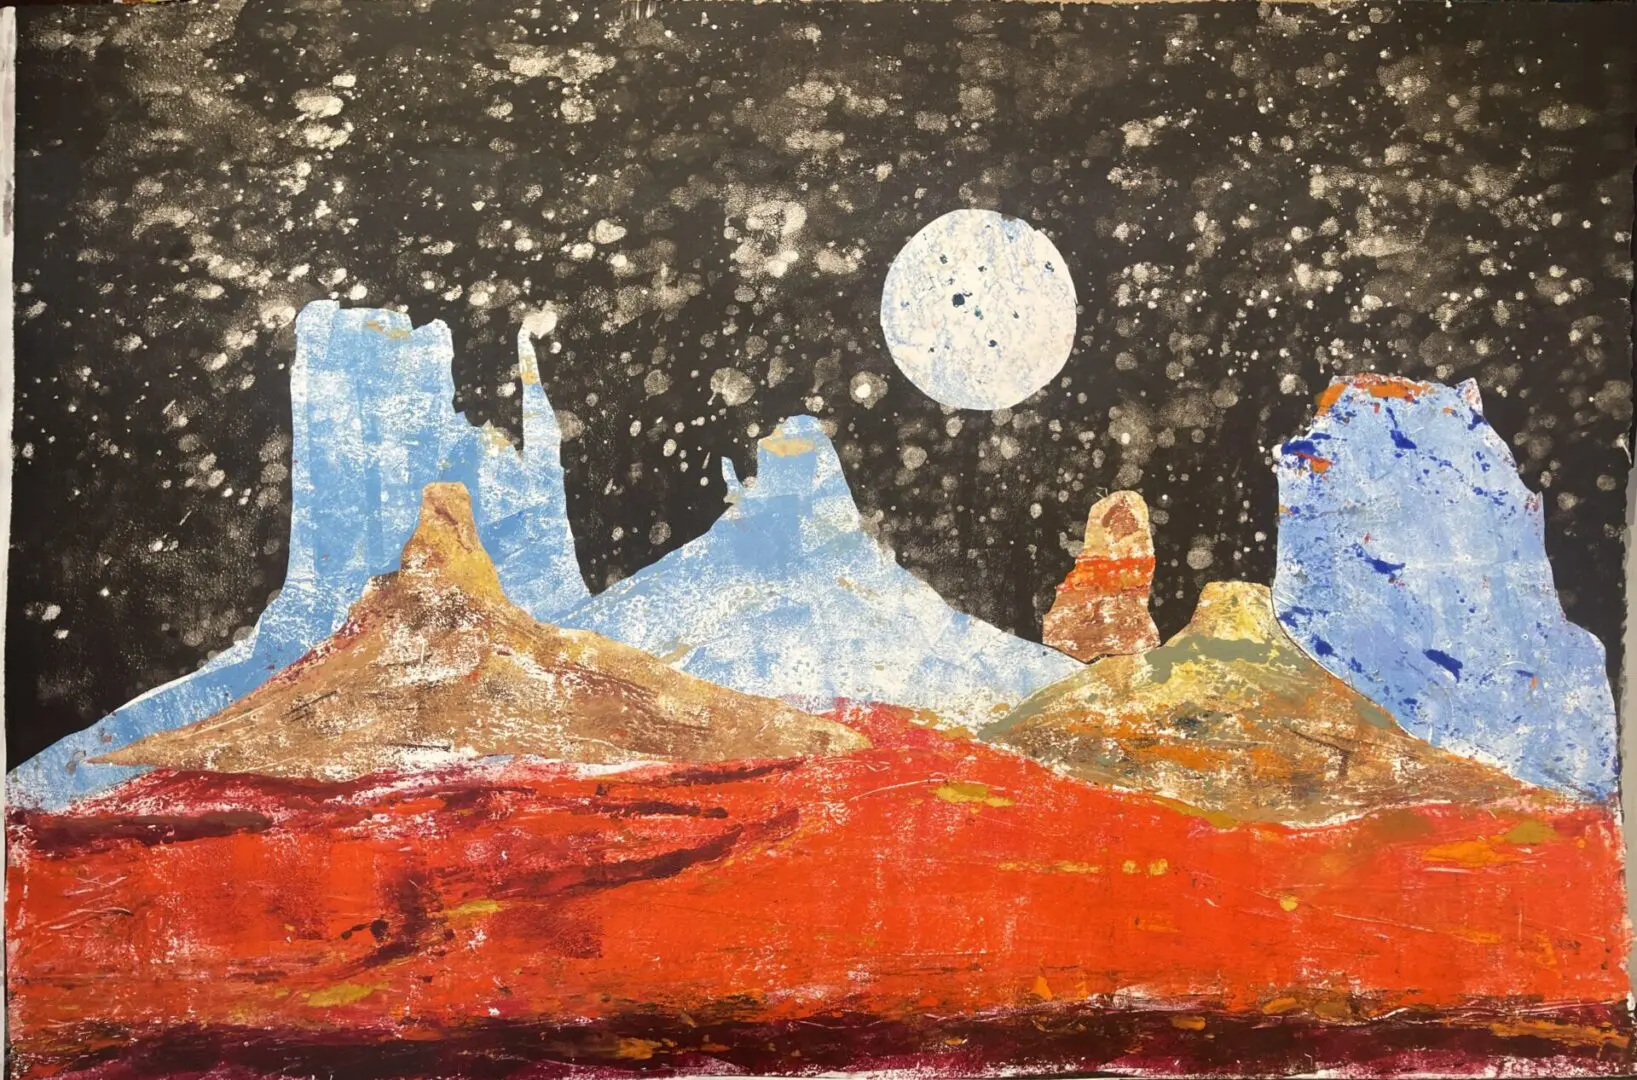 A painting of a desert landscape with a moon in the background.